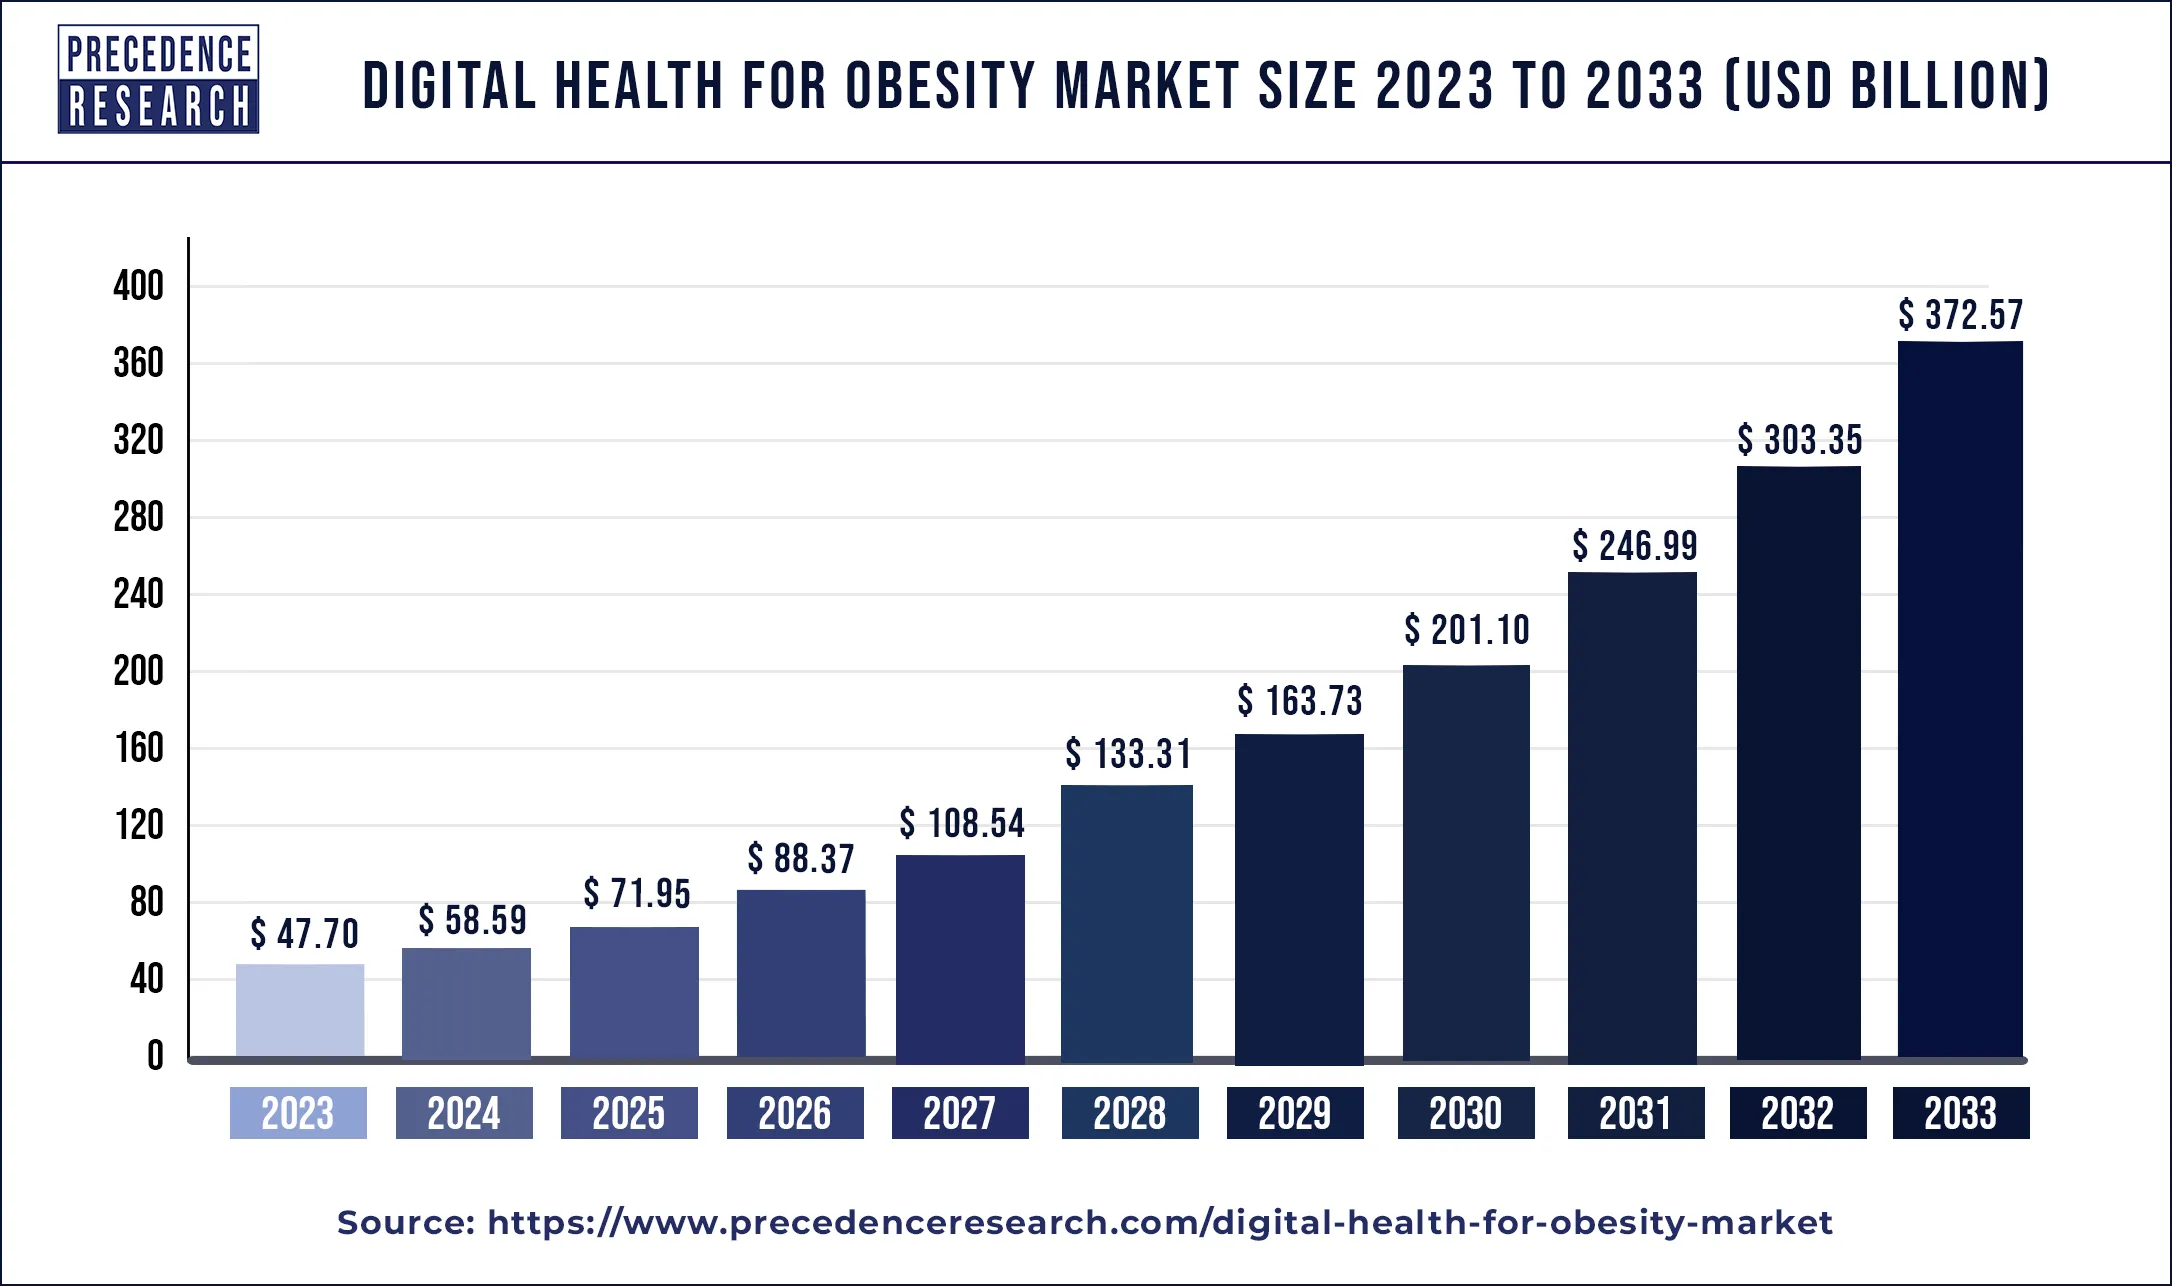 Digital Health for Obesity Market Size 2024 to 2033 